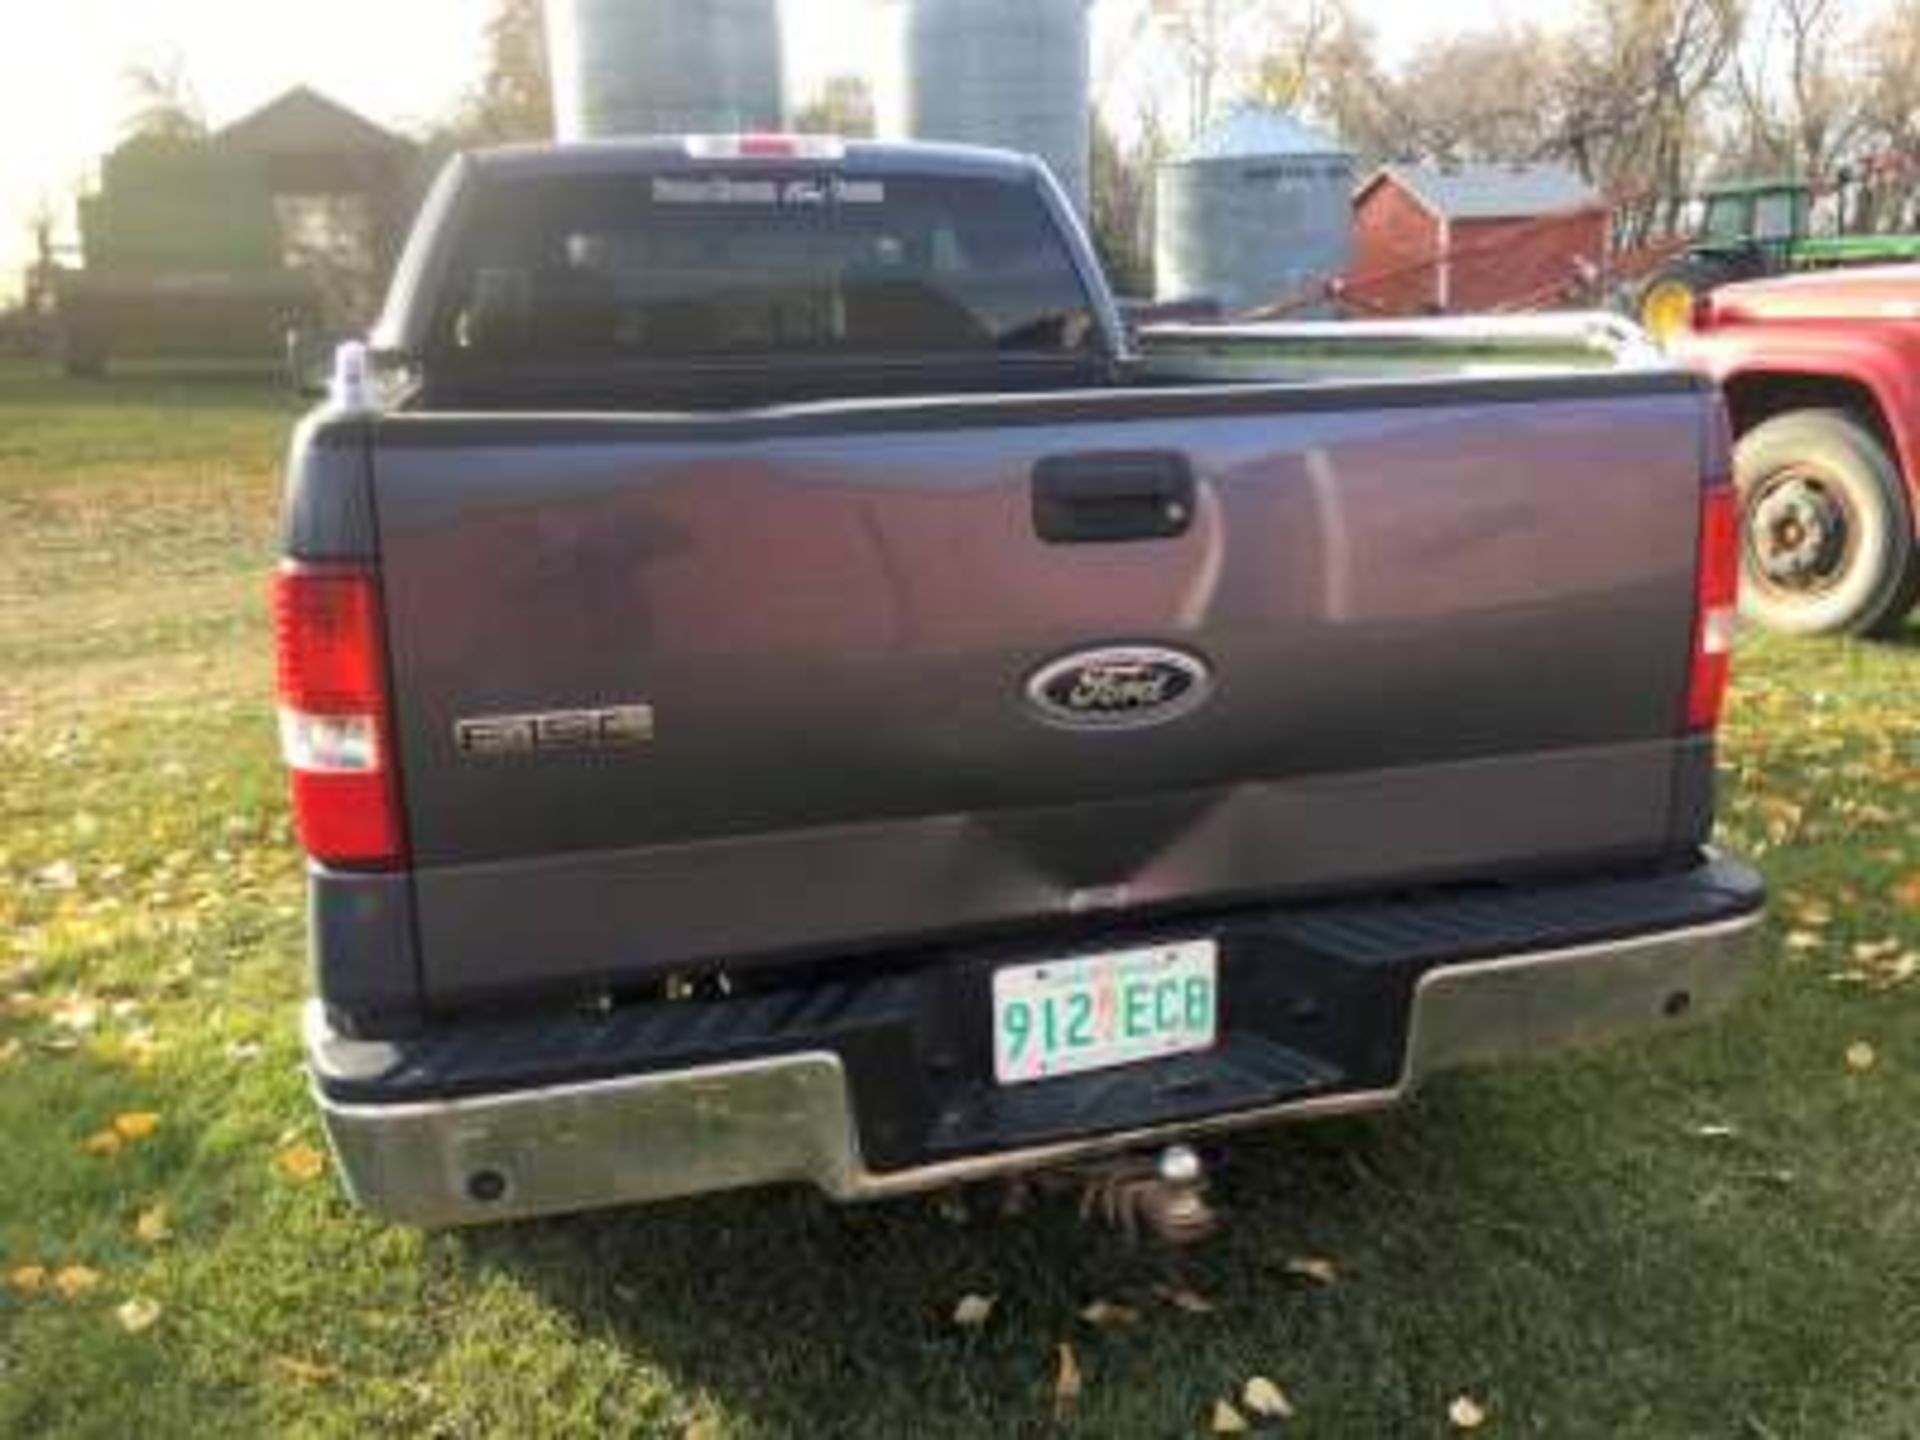 2004 F150 XLT 5.4 Triton 4x4 Ford ½ Ton truck, ext cab, 71168kms (very clean) - Image 3 of 5